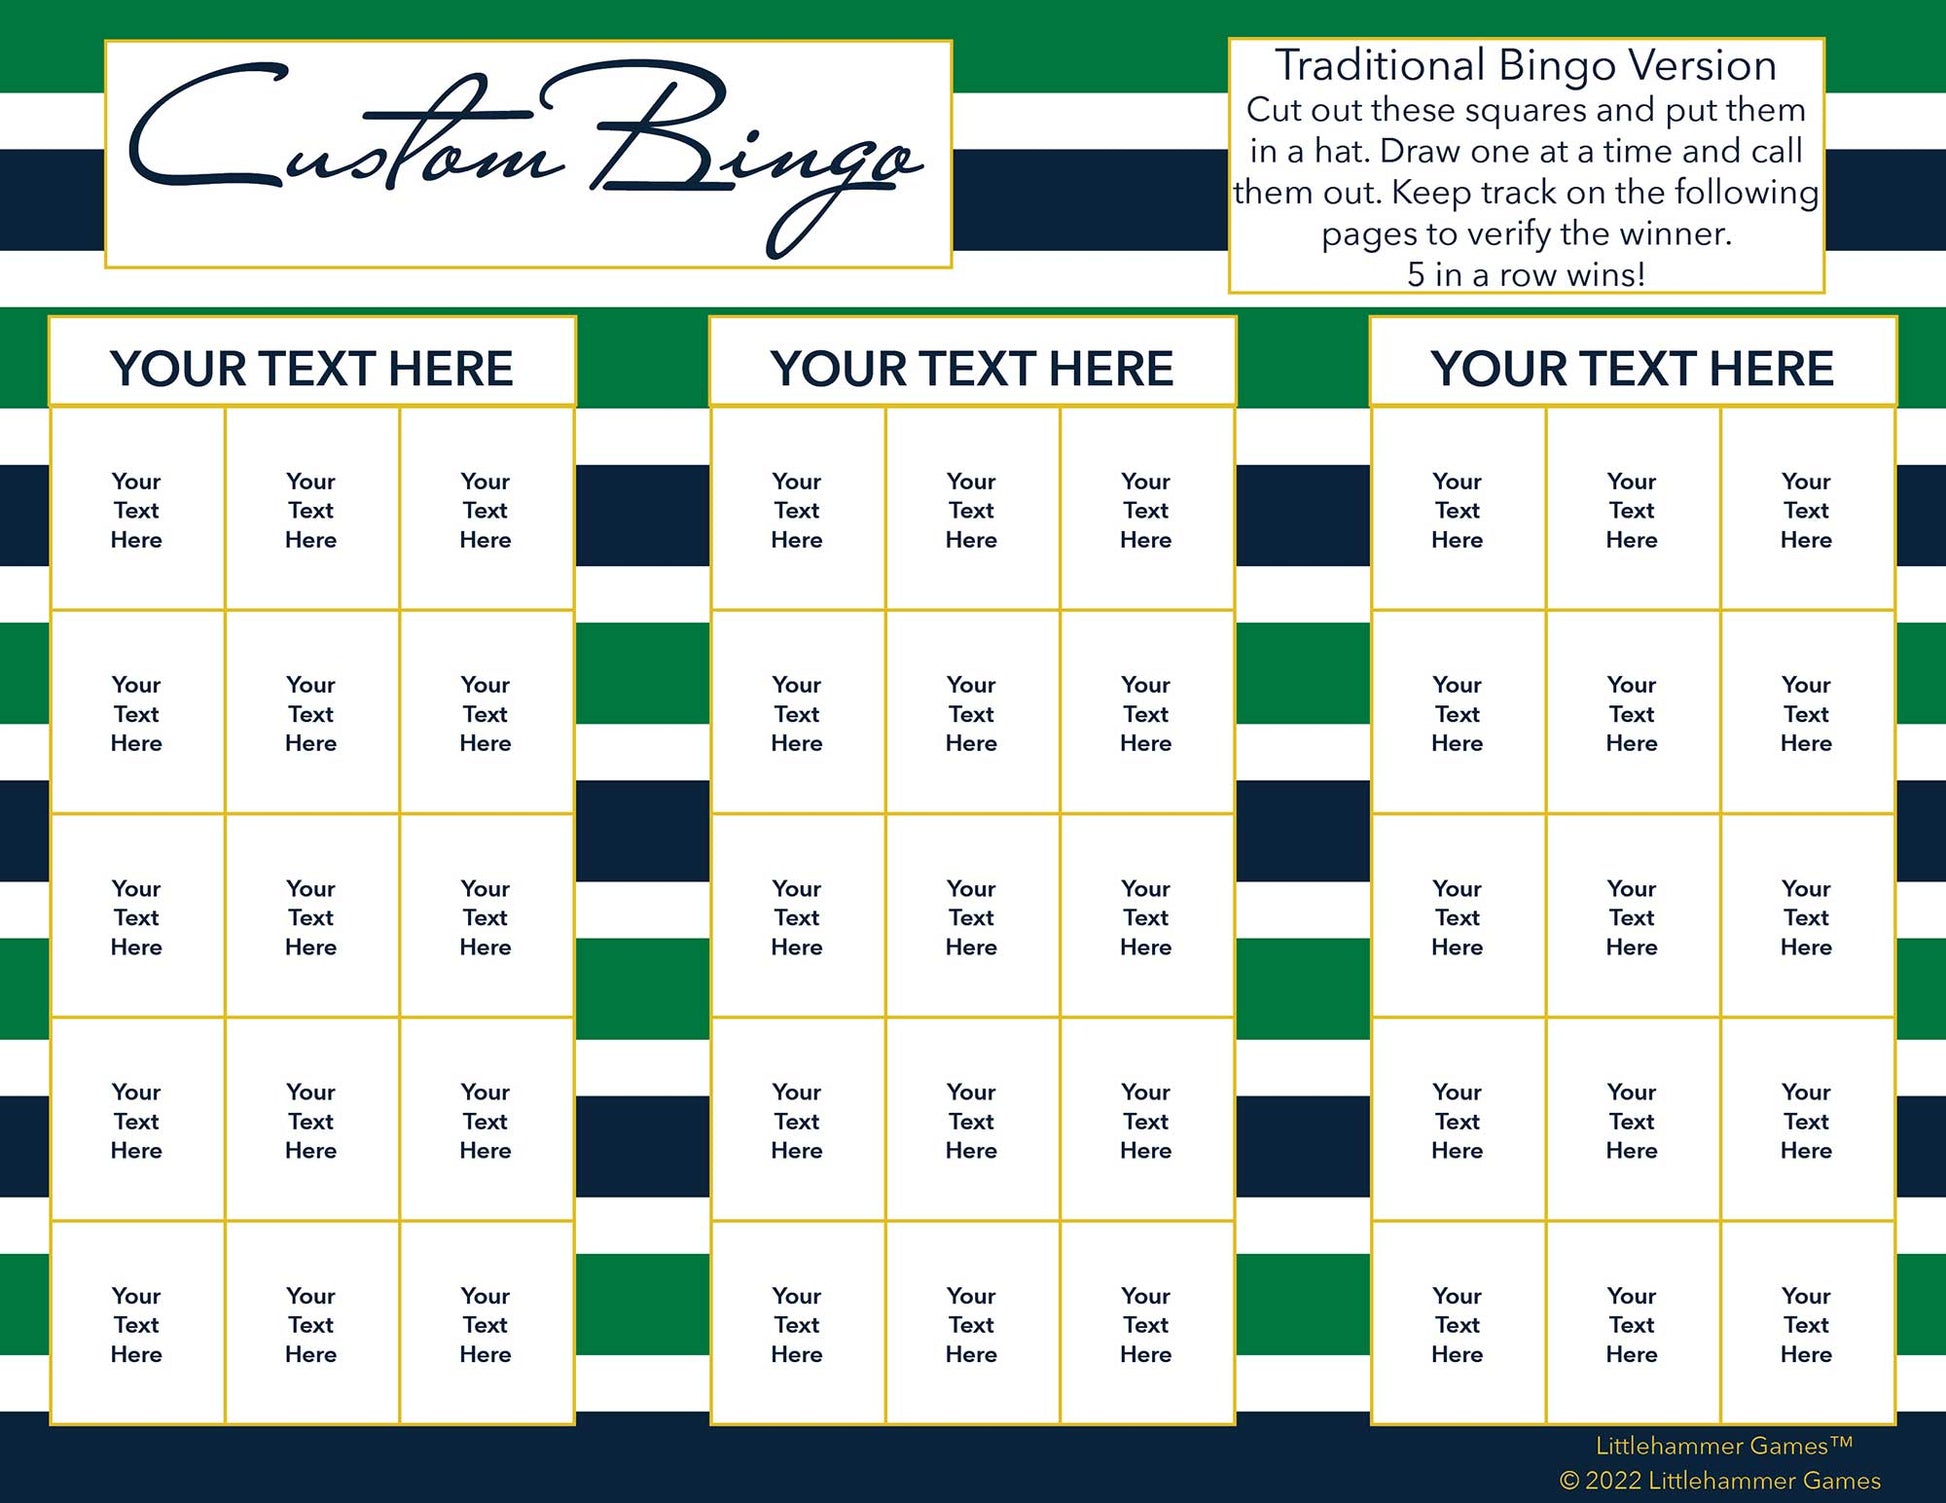 Custom Bingo calling card with a green and navy-striped background